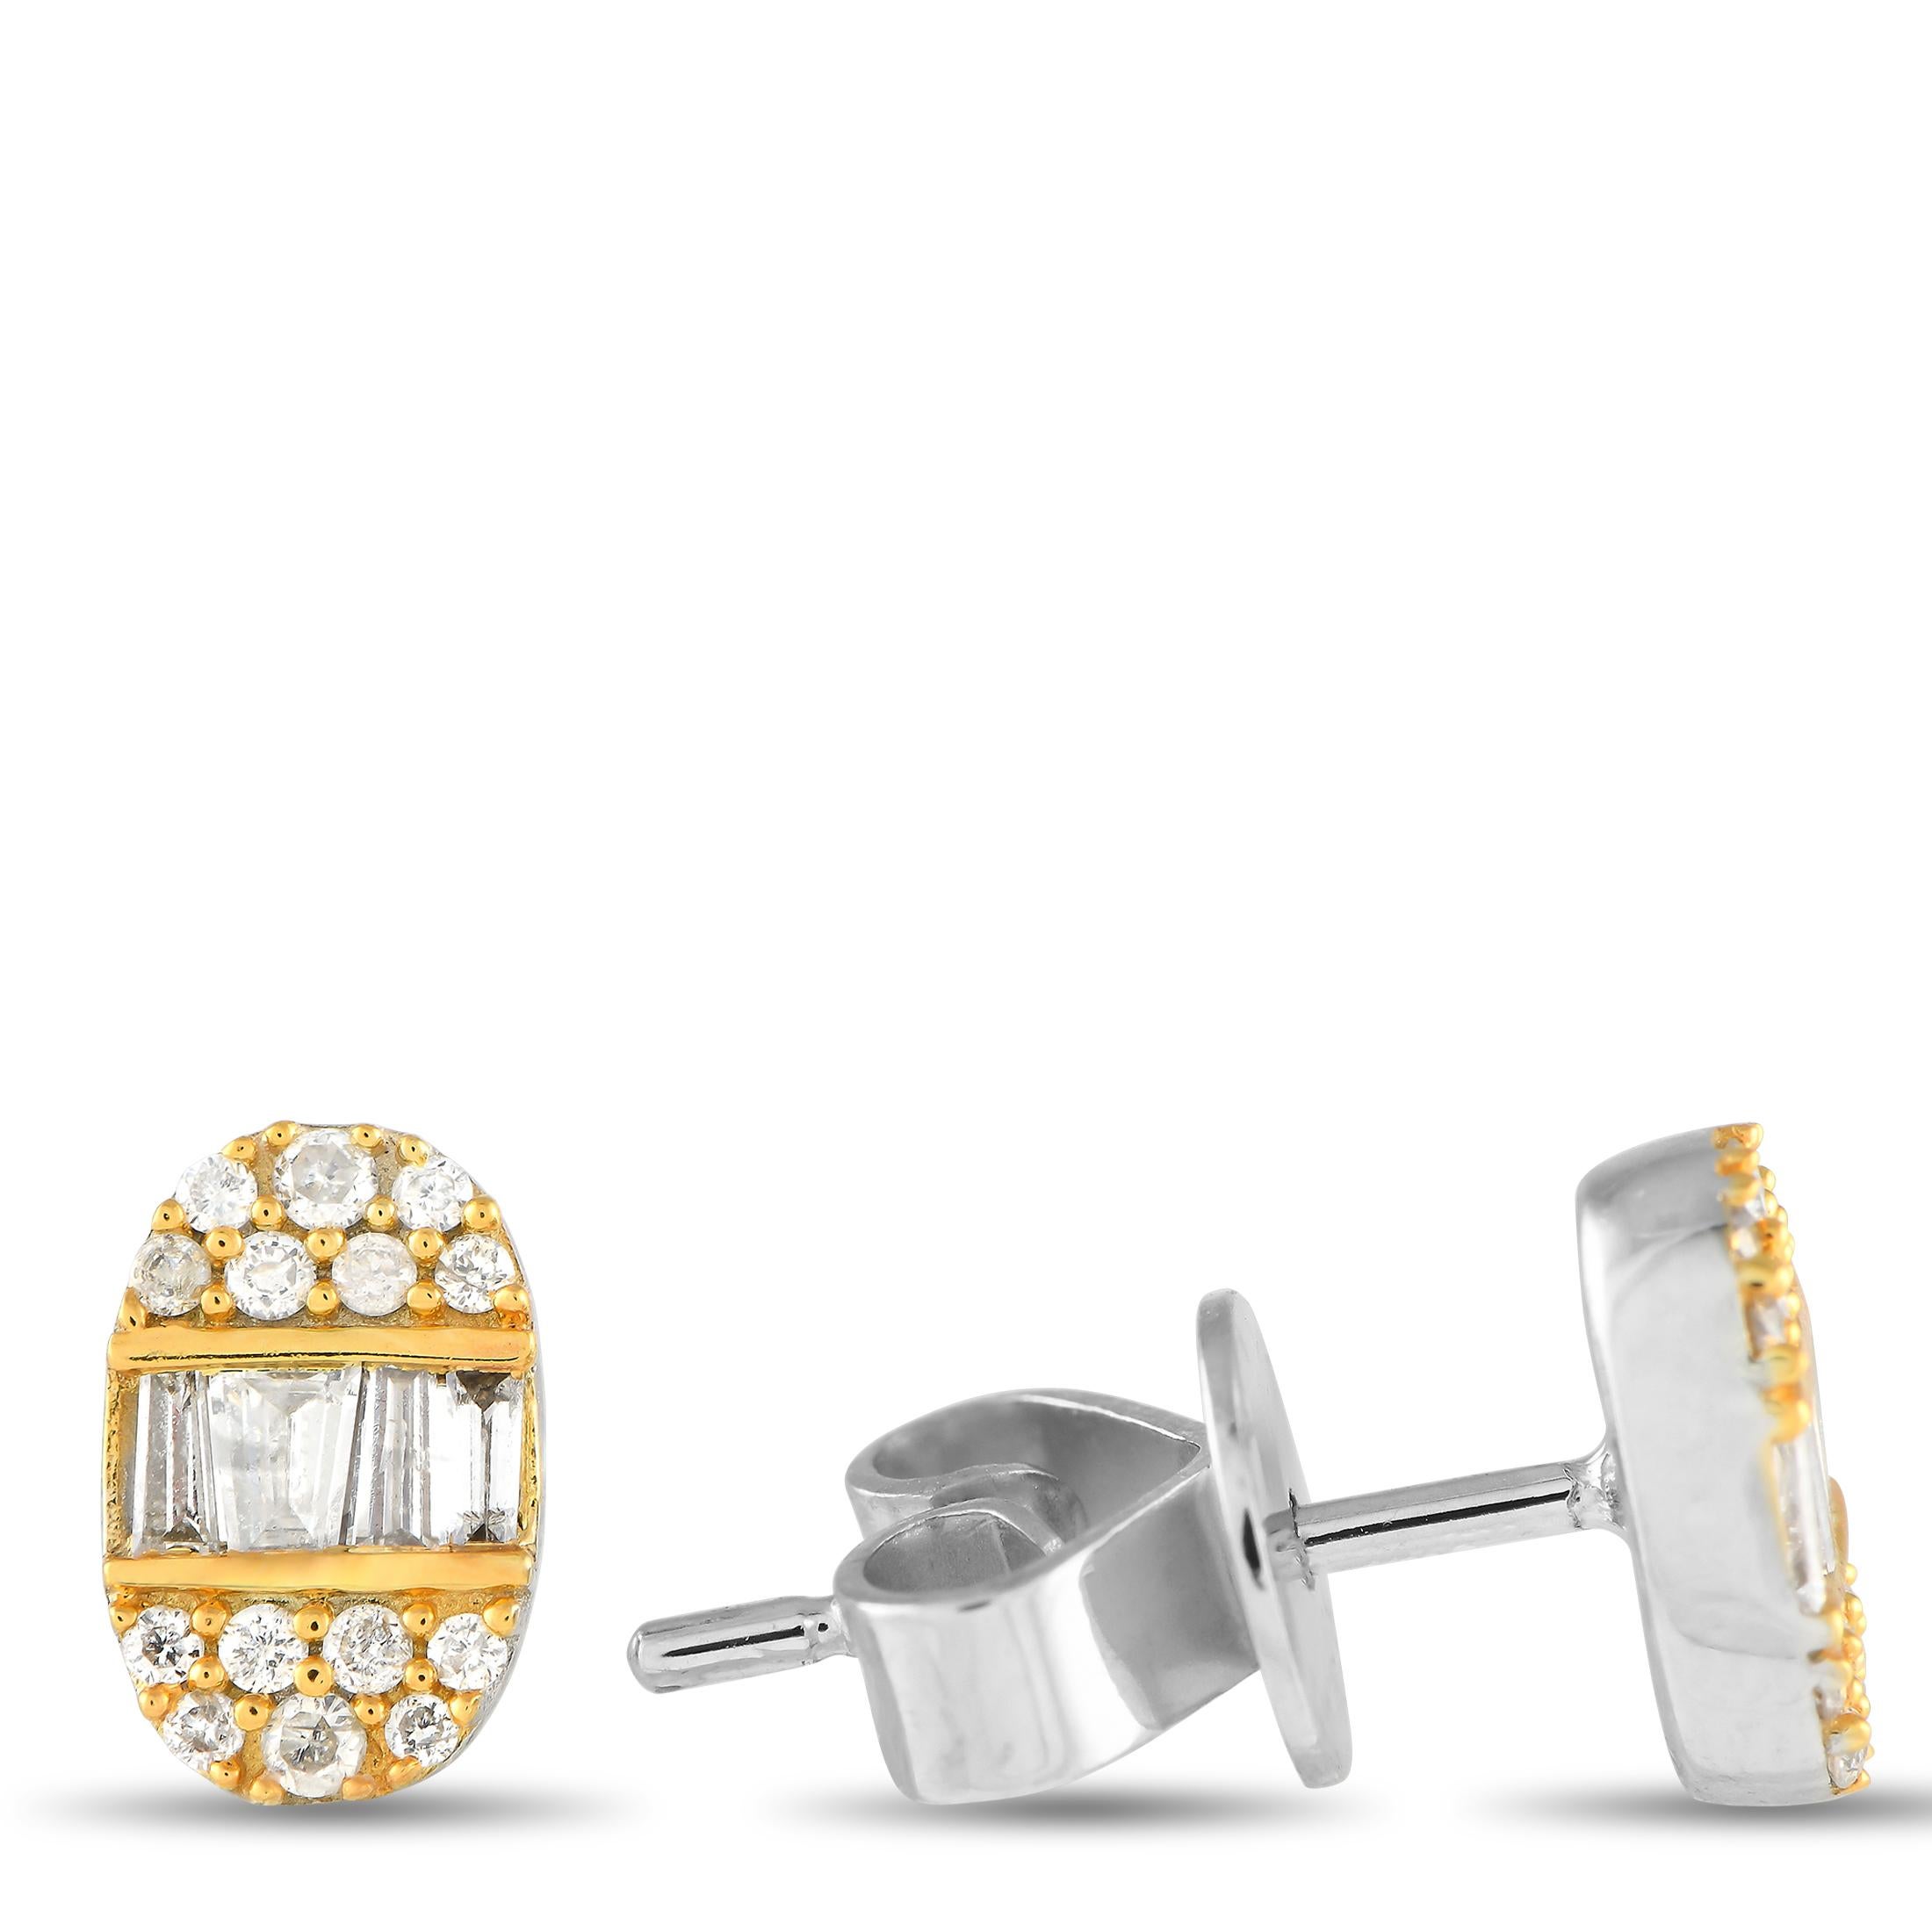 Effortlessly bring interest to your outfits with these two-toned sparklers designed with geometric sophistication. Each earring features an oval shape, with a yellow gold face and a white gold post. The earrings are decorated with a short row of